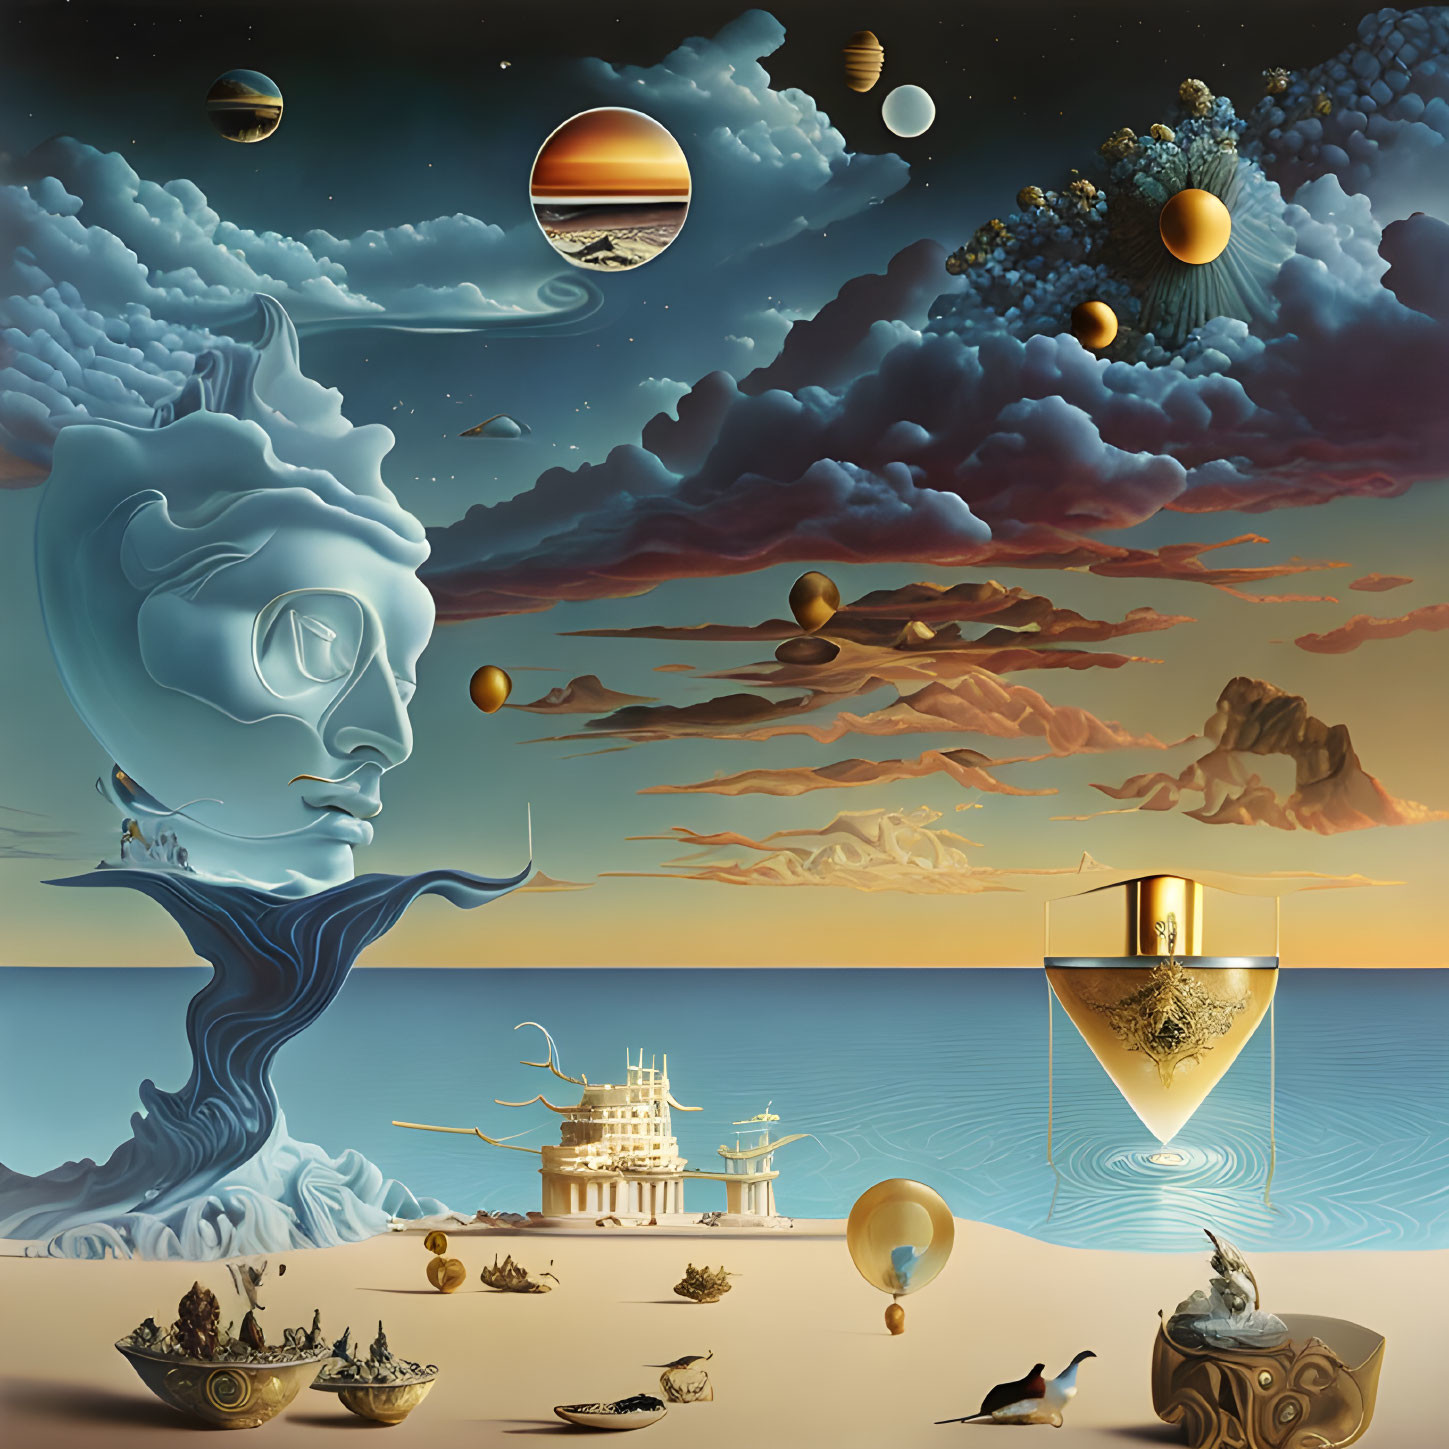 Surreal landscape featuring giant head formation, floating celestial bodies, golden pyramid, and architectural structures.